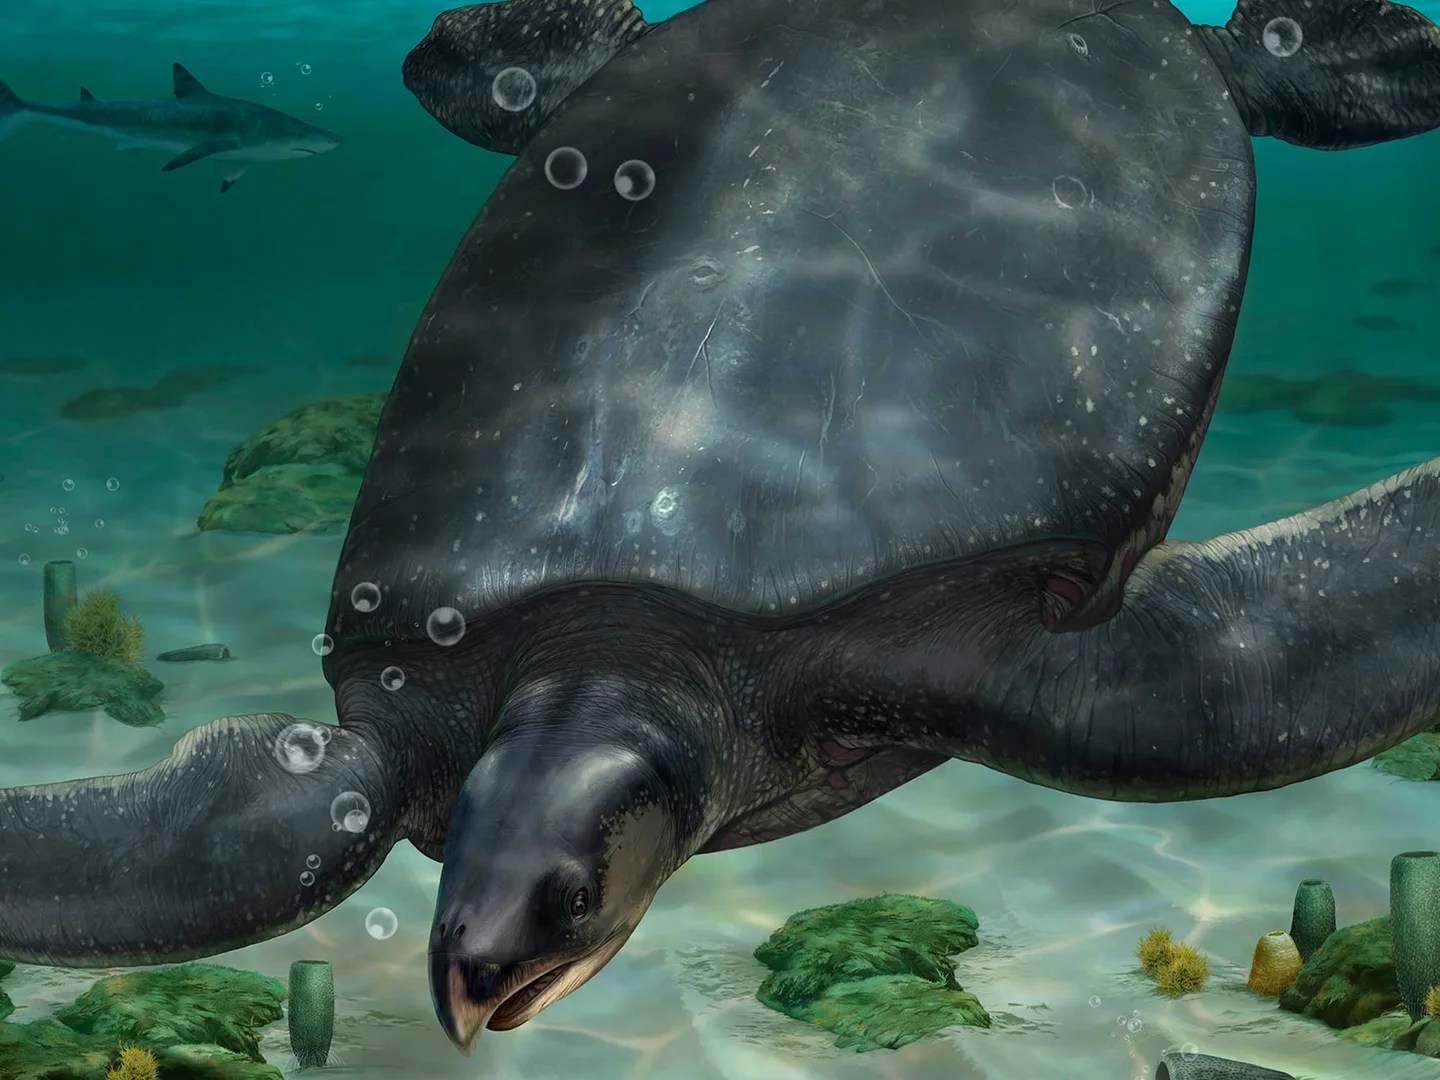  Archaeologists Have Discovered A Turtle The Size Of A Rhinoceros In Spain